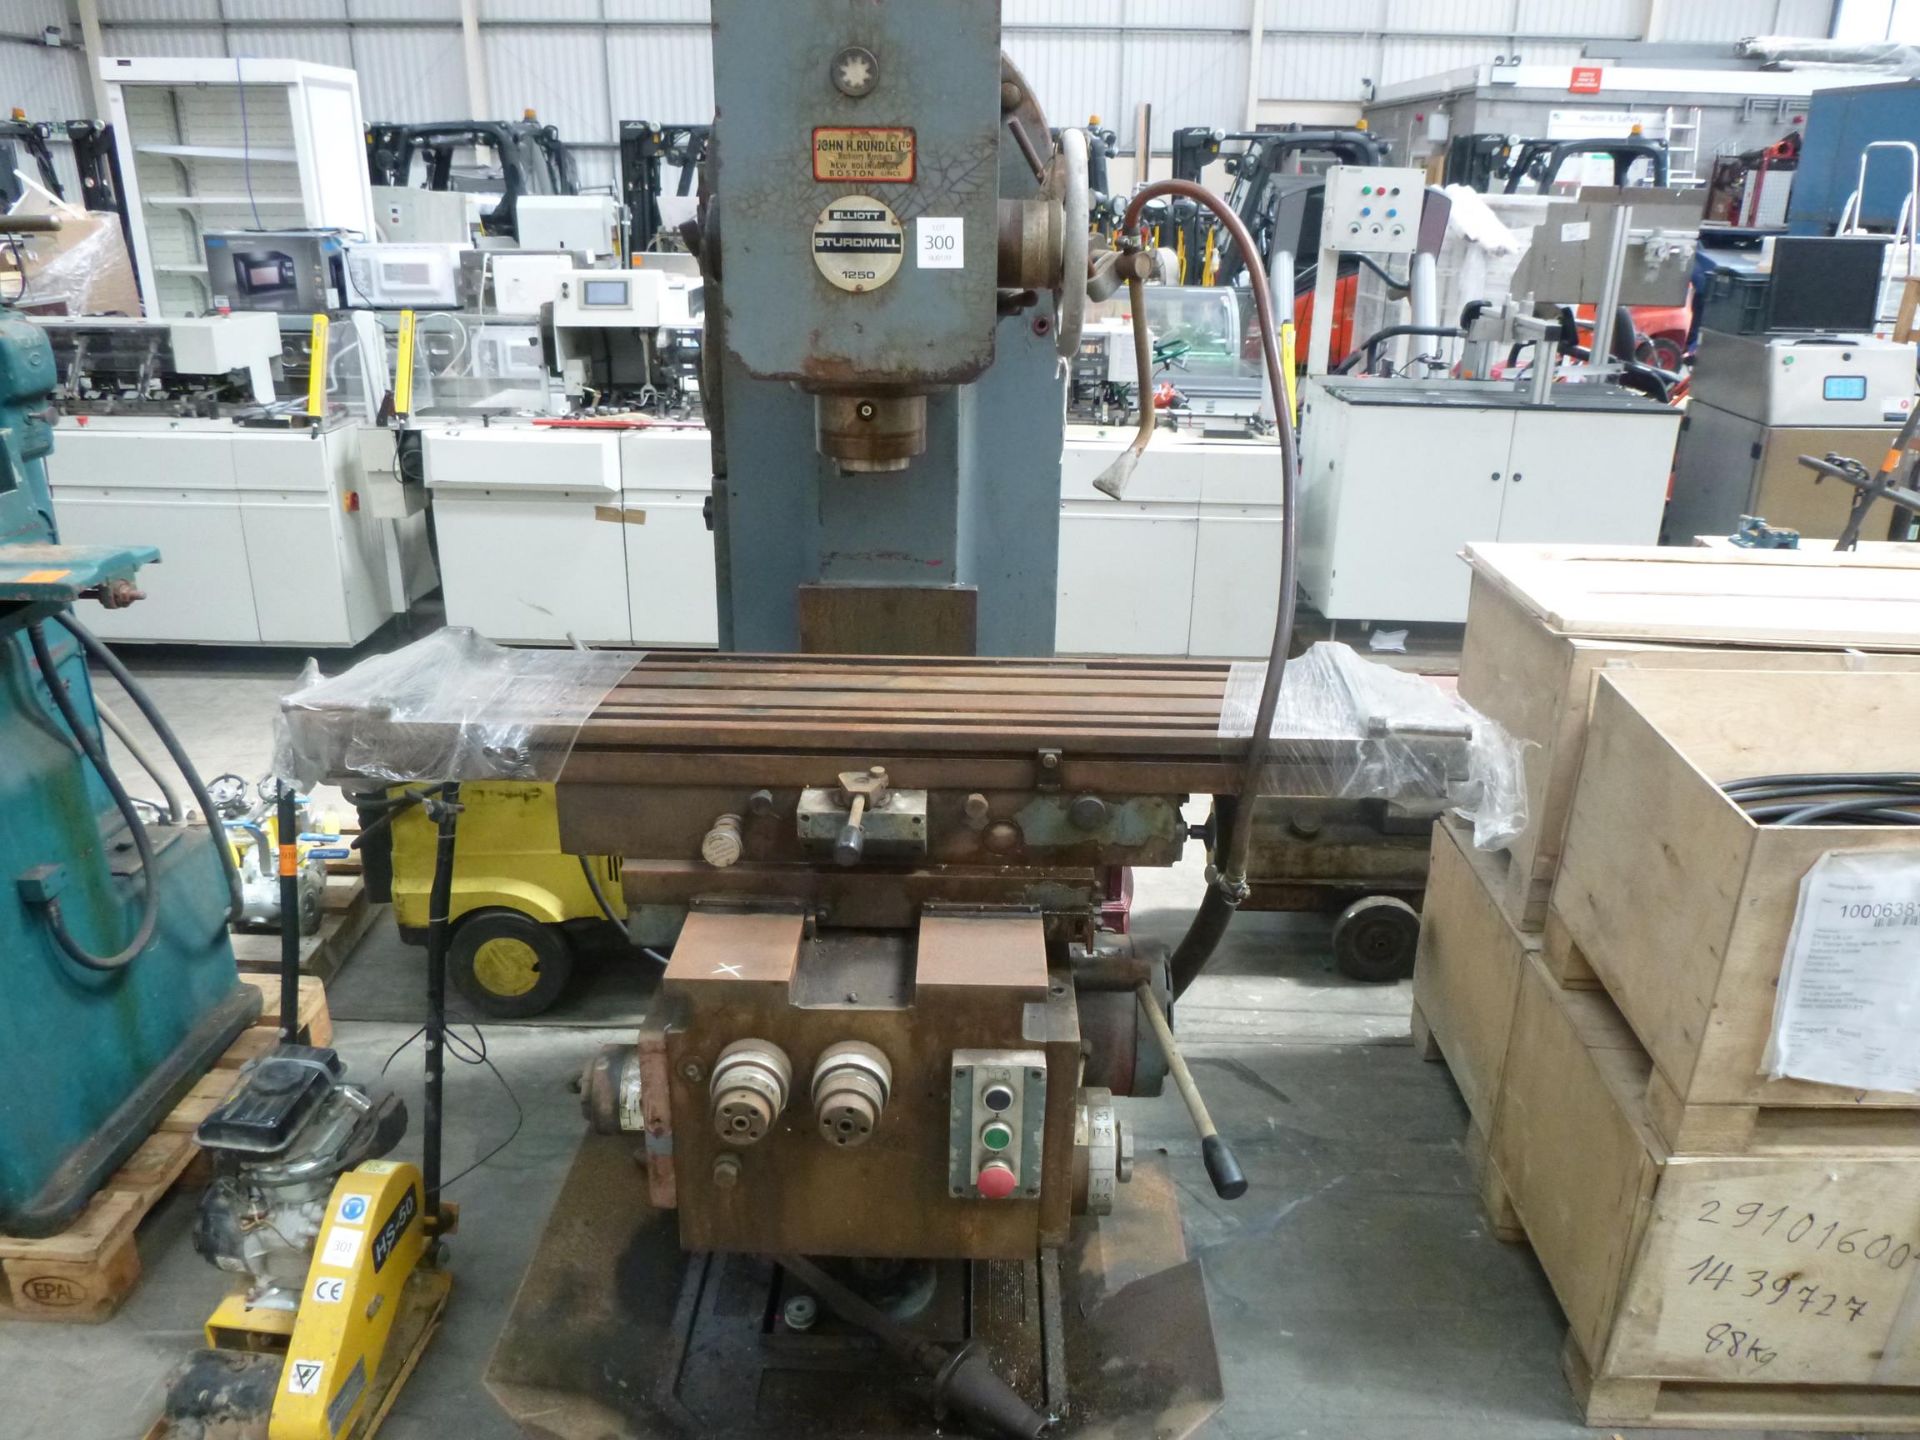 * An Elliot Sturdimill 1250 Milling Machine, S/N HQ13272 D4019202, 3PH. Please note there is a £20 - Image 2 of 3